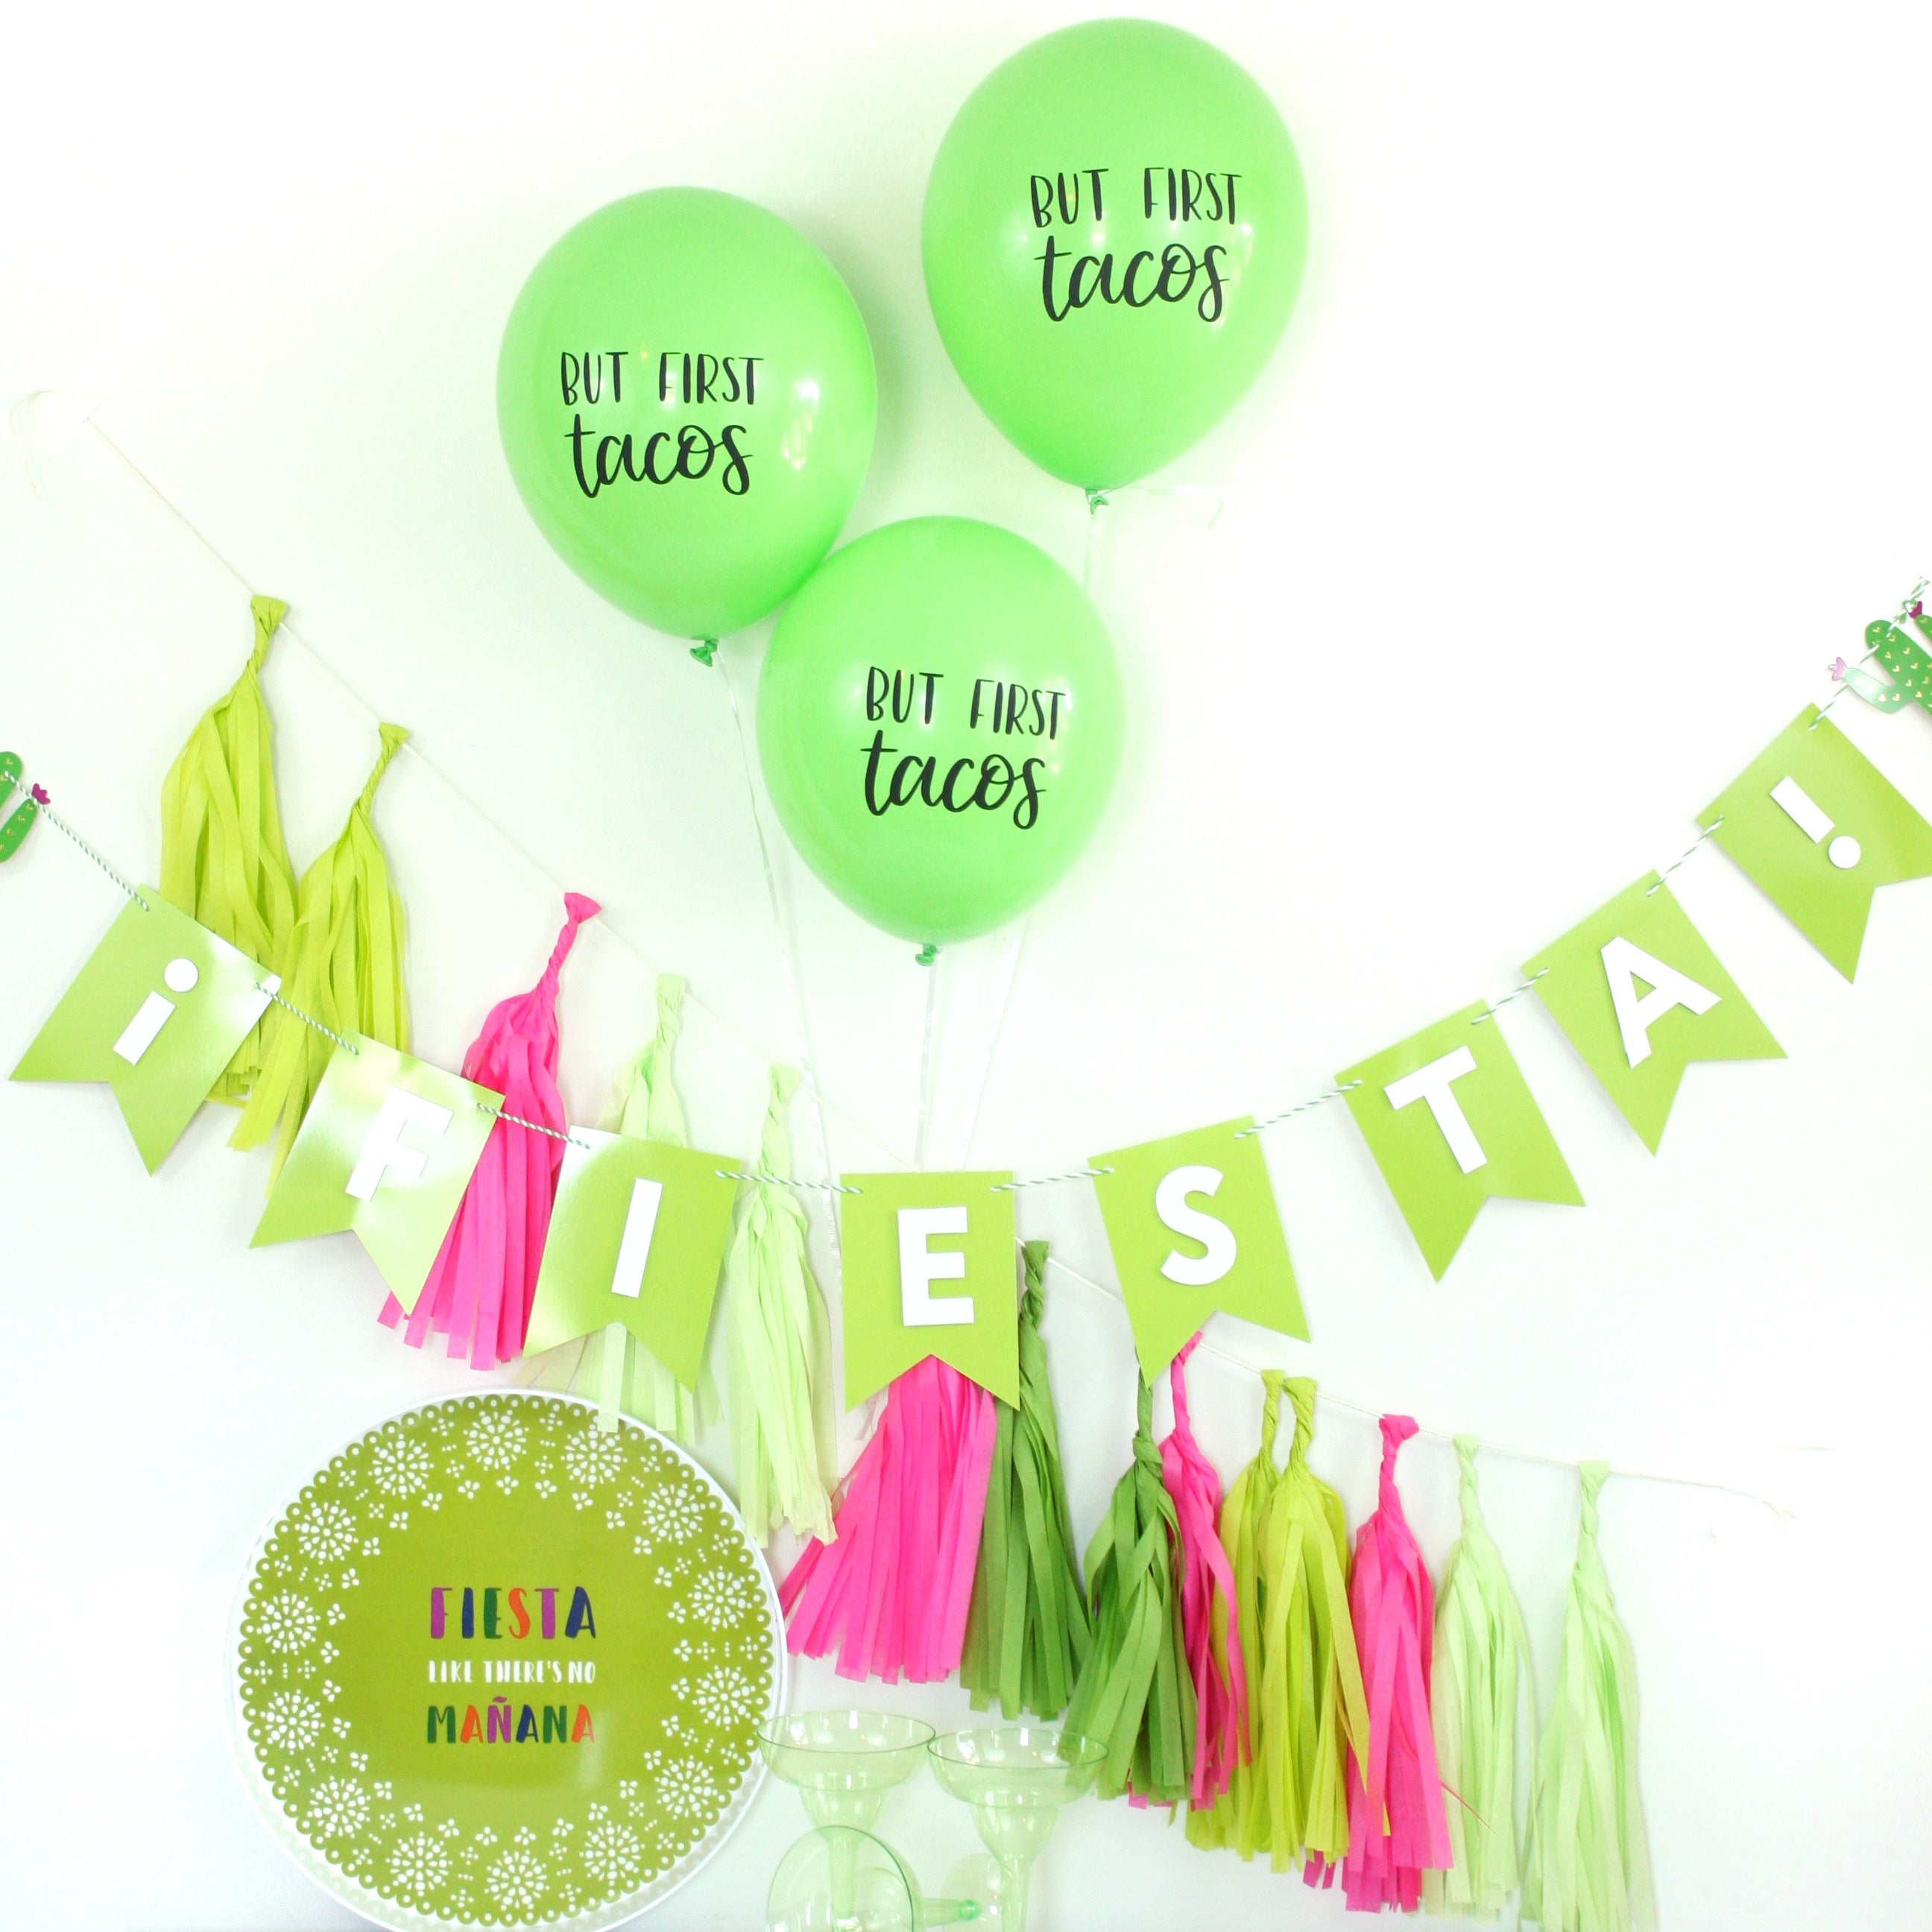 But First Tacos Balloons (Set of 3)